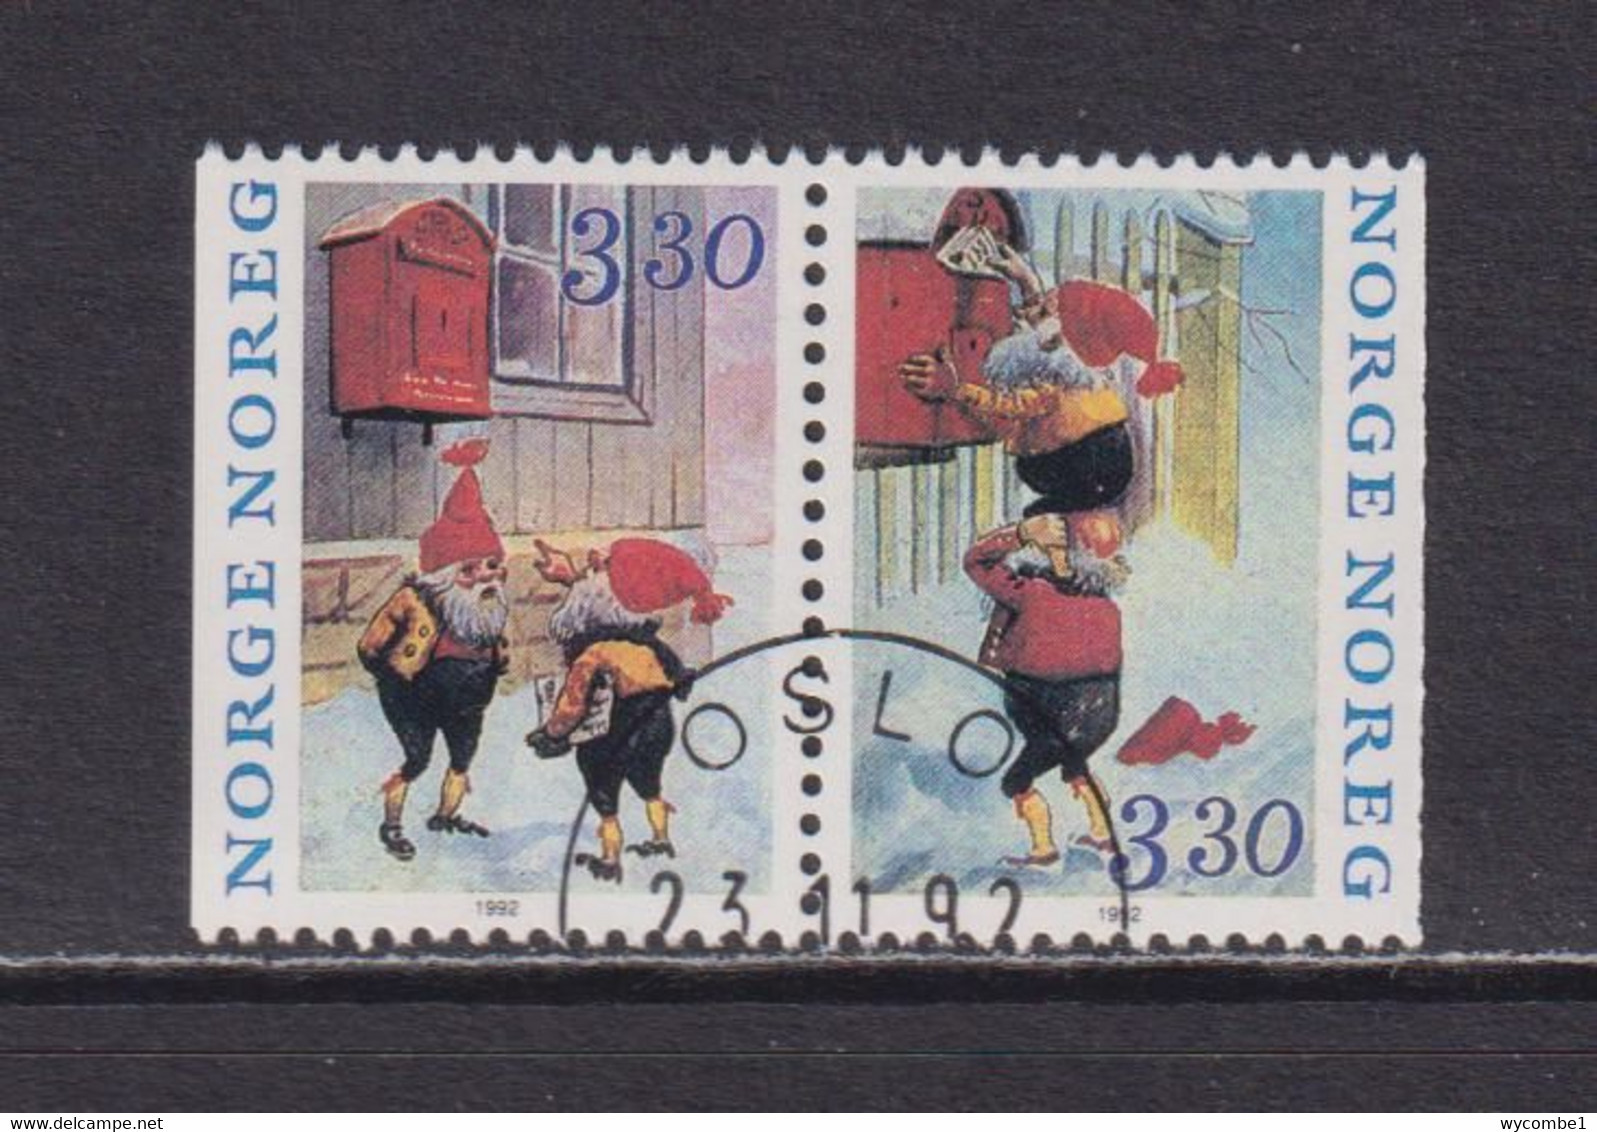 NORWAY - 1992 Christmas Booklet Pair Used As Scan - Used Stamps